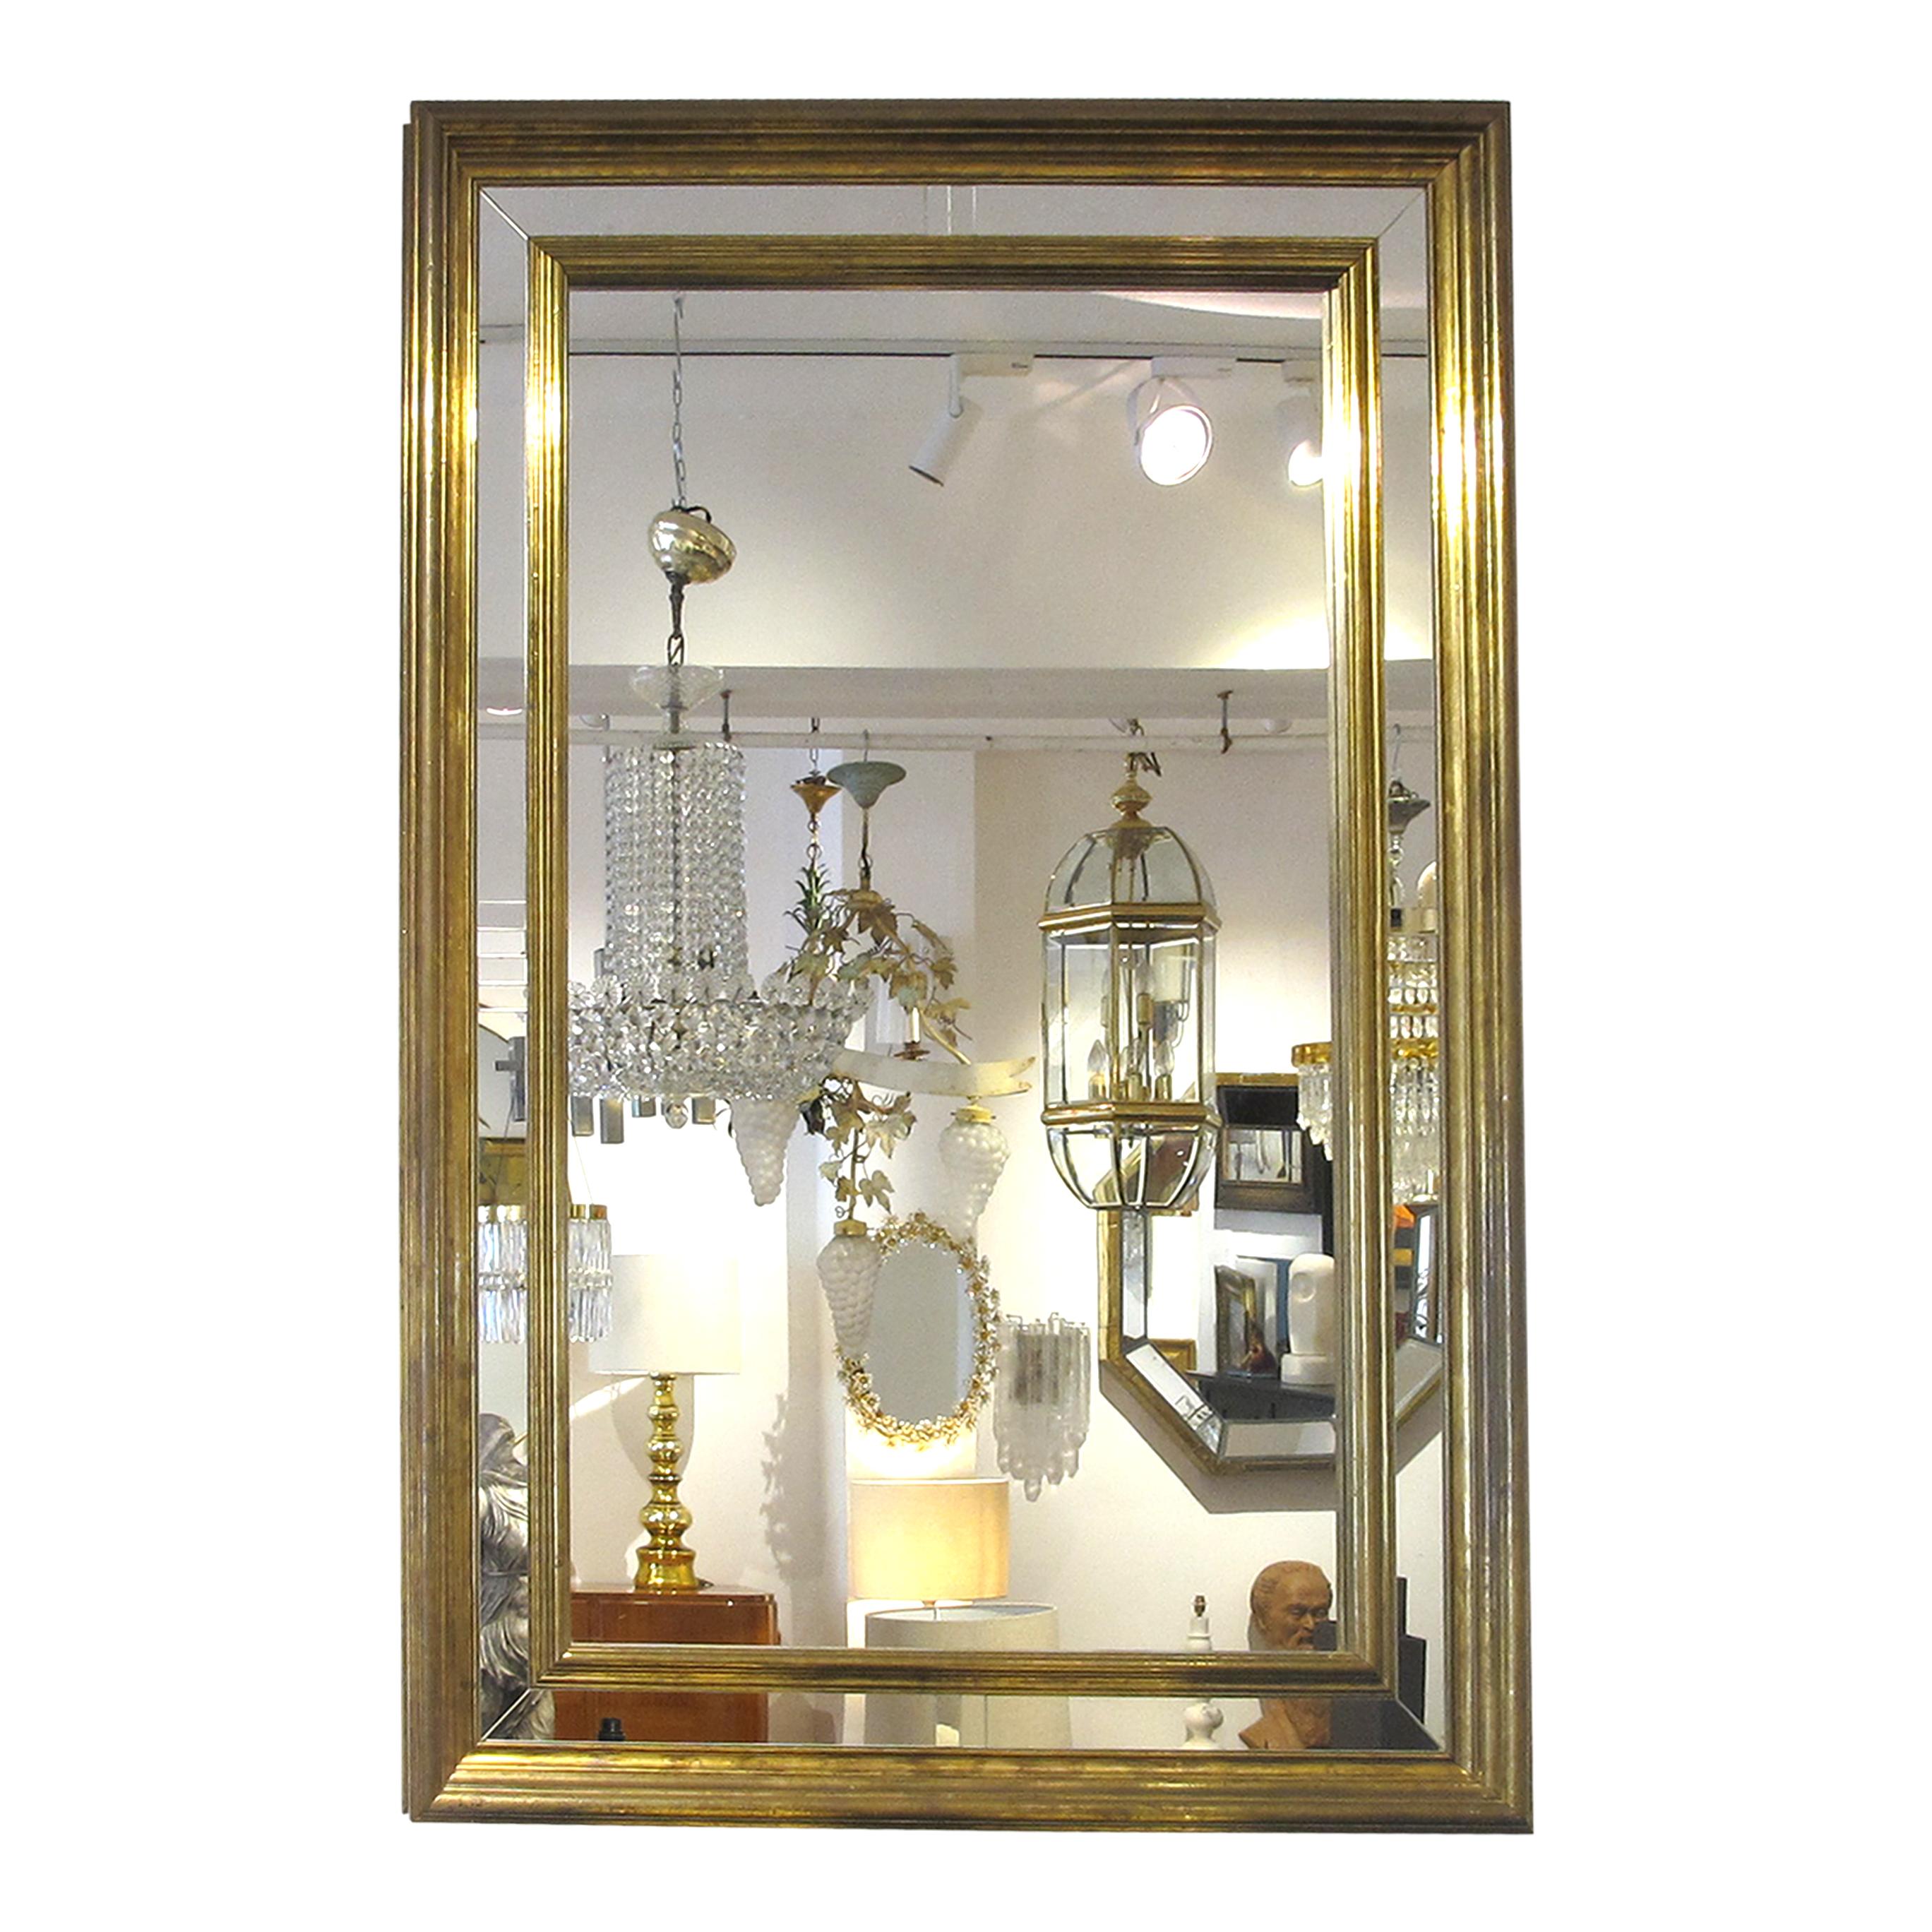 1970s Large Spanish rectangular brass-clad multi-sectional mirror by Rodolfo Dubarry. The mirror's design is further enhanced by its unique multi-sectional composition. Divided into several distinct sections, each pane of glass is discreetly framed